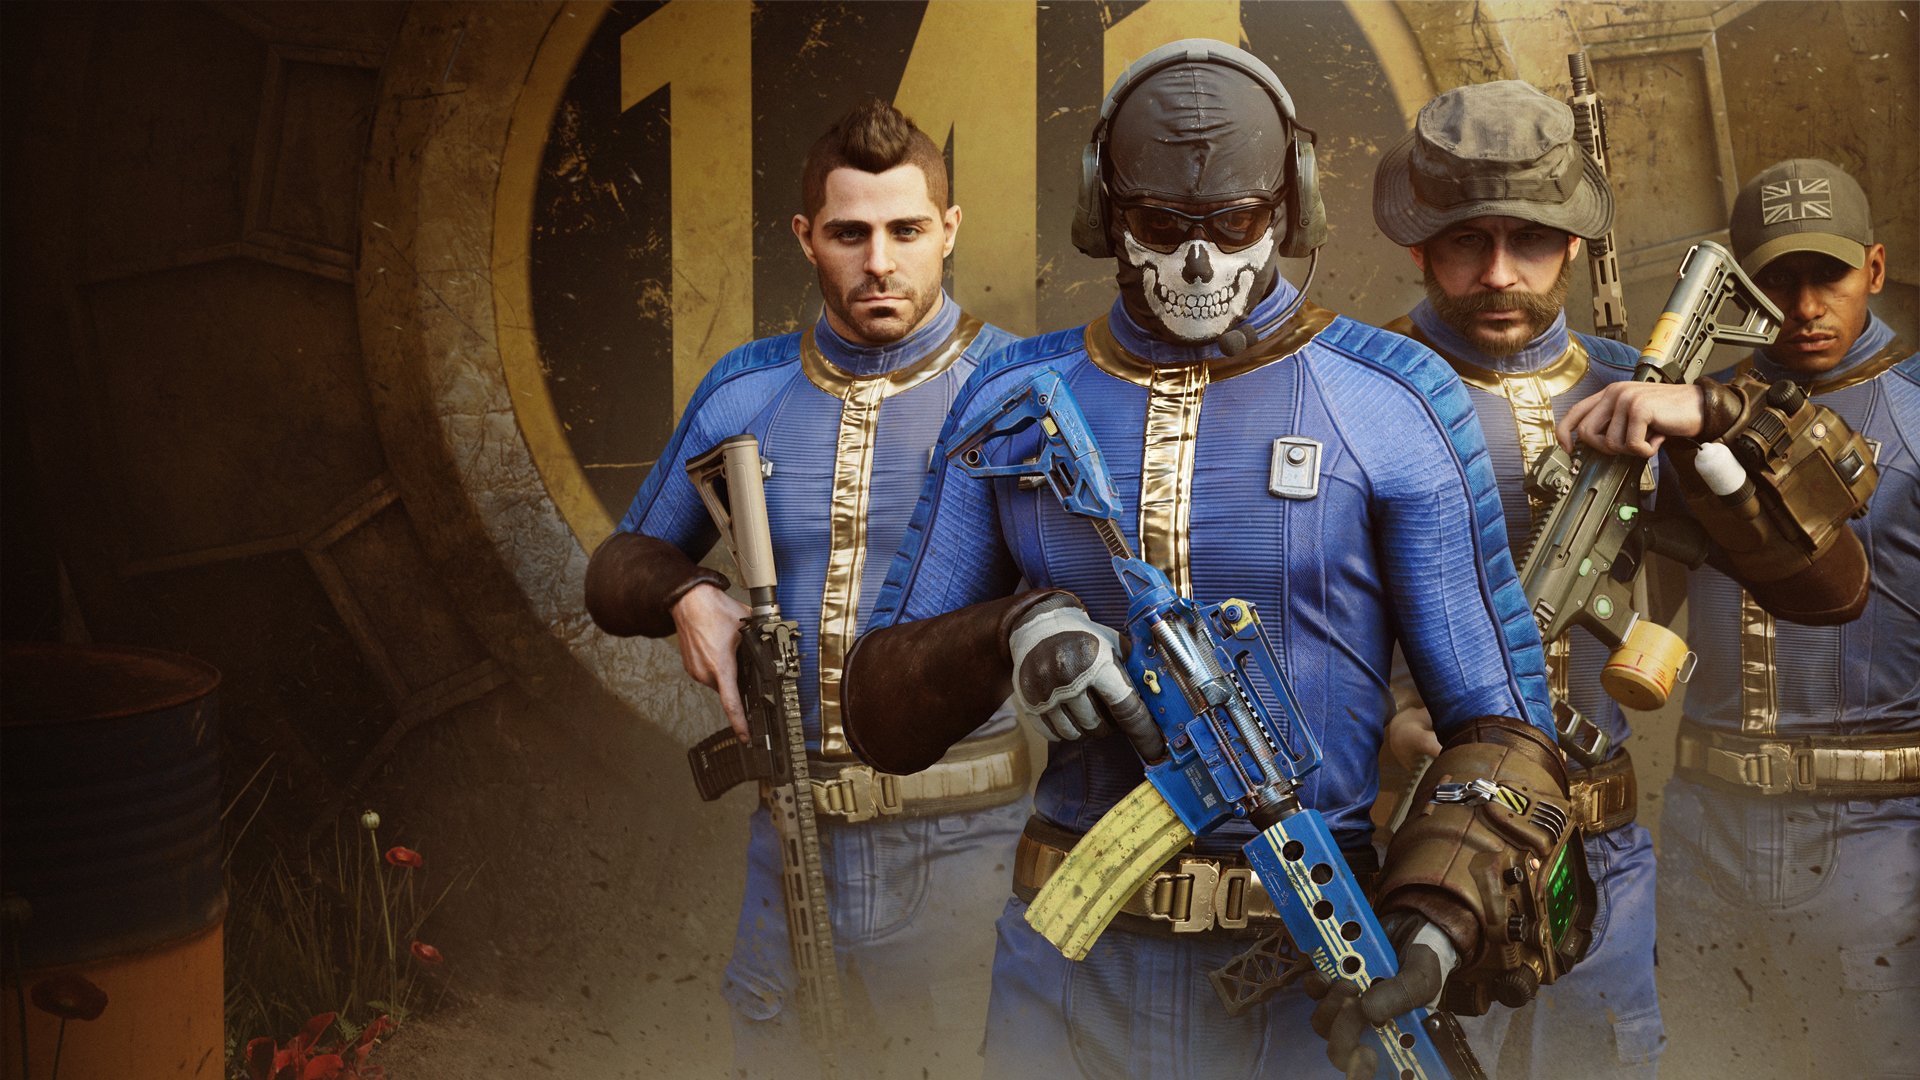 Fallout and Call of Duty keyart, with characters wearing blue and gold jumpsuits